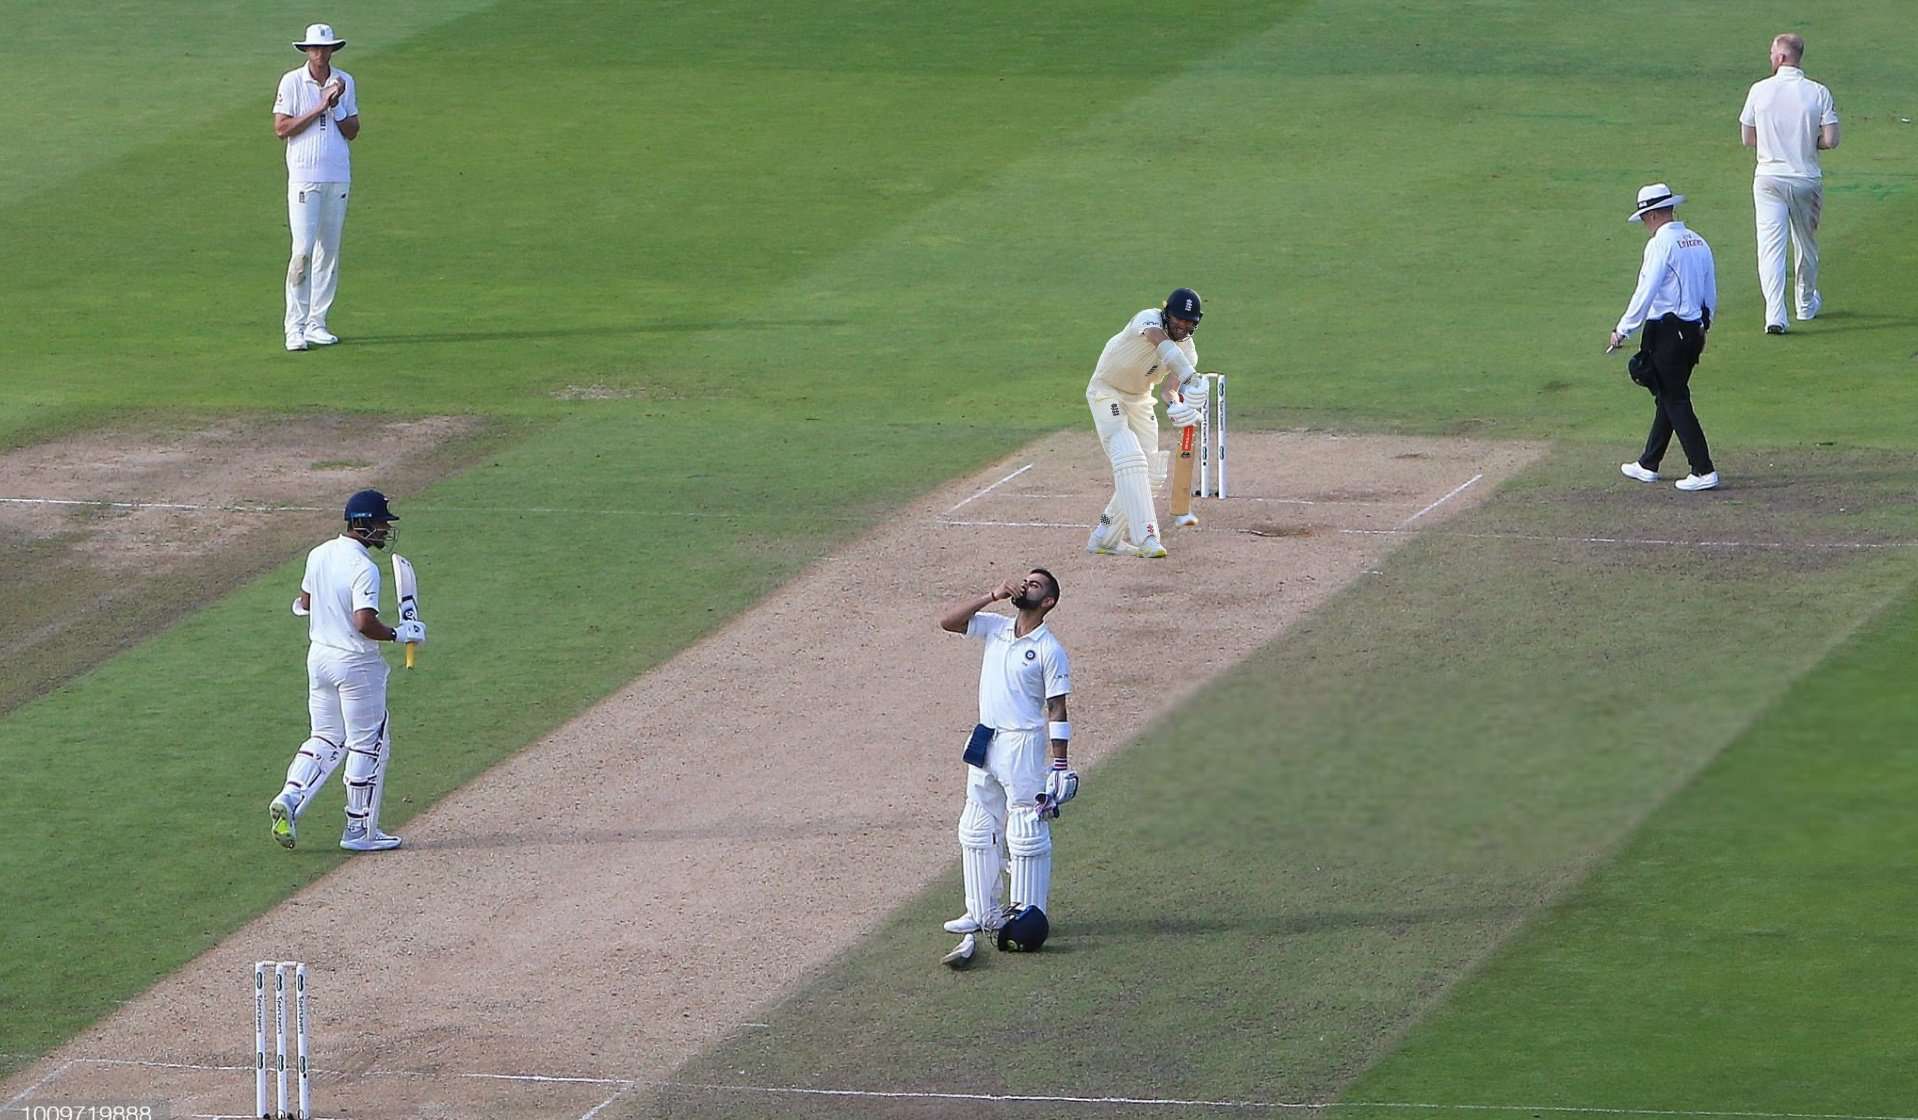 9.Anderson's Last Ball Defence